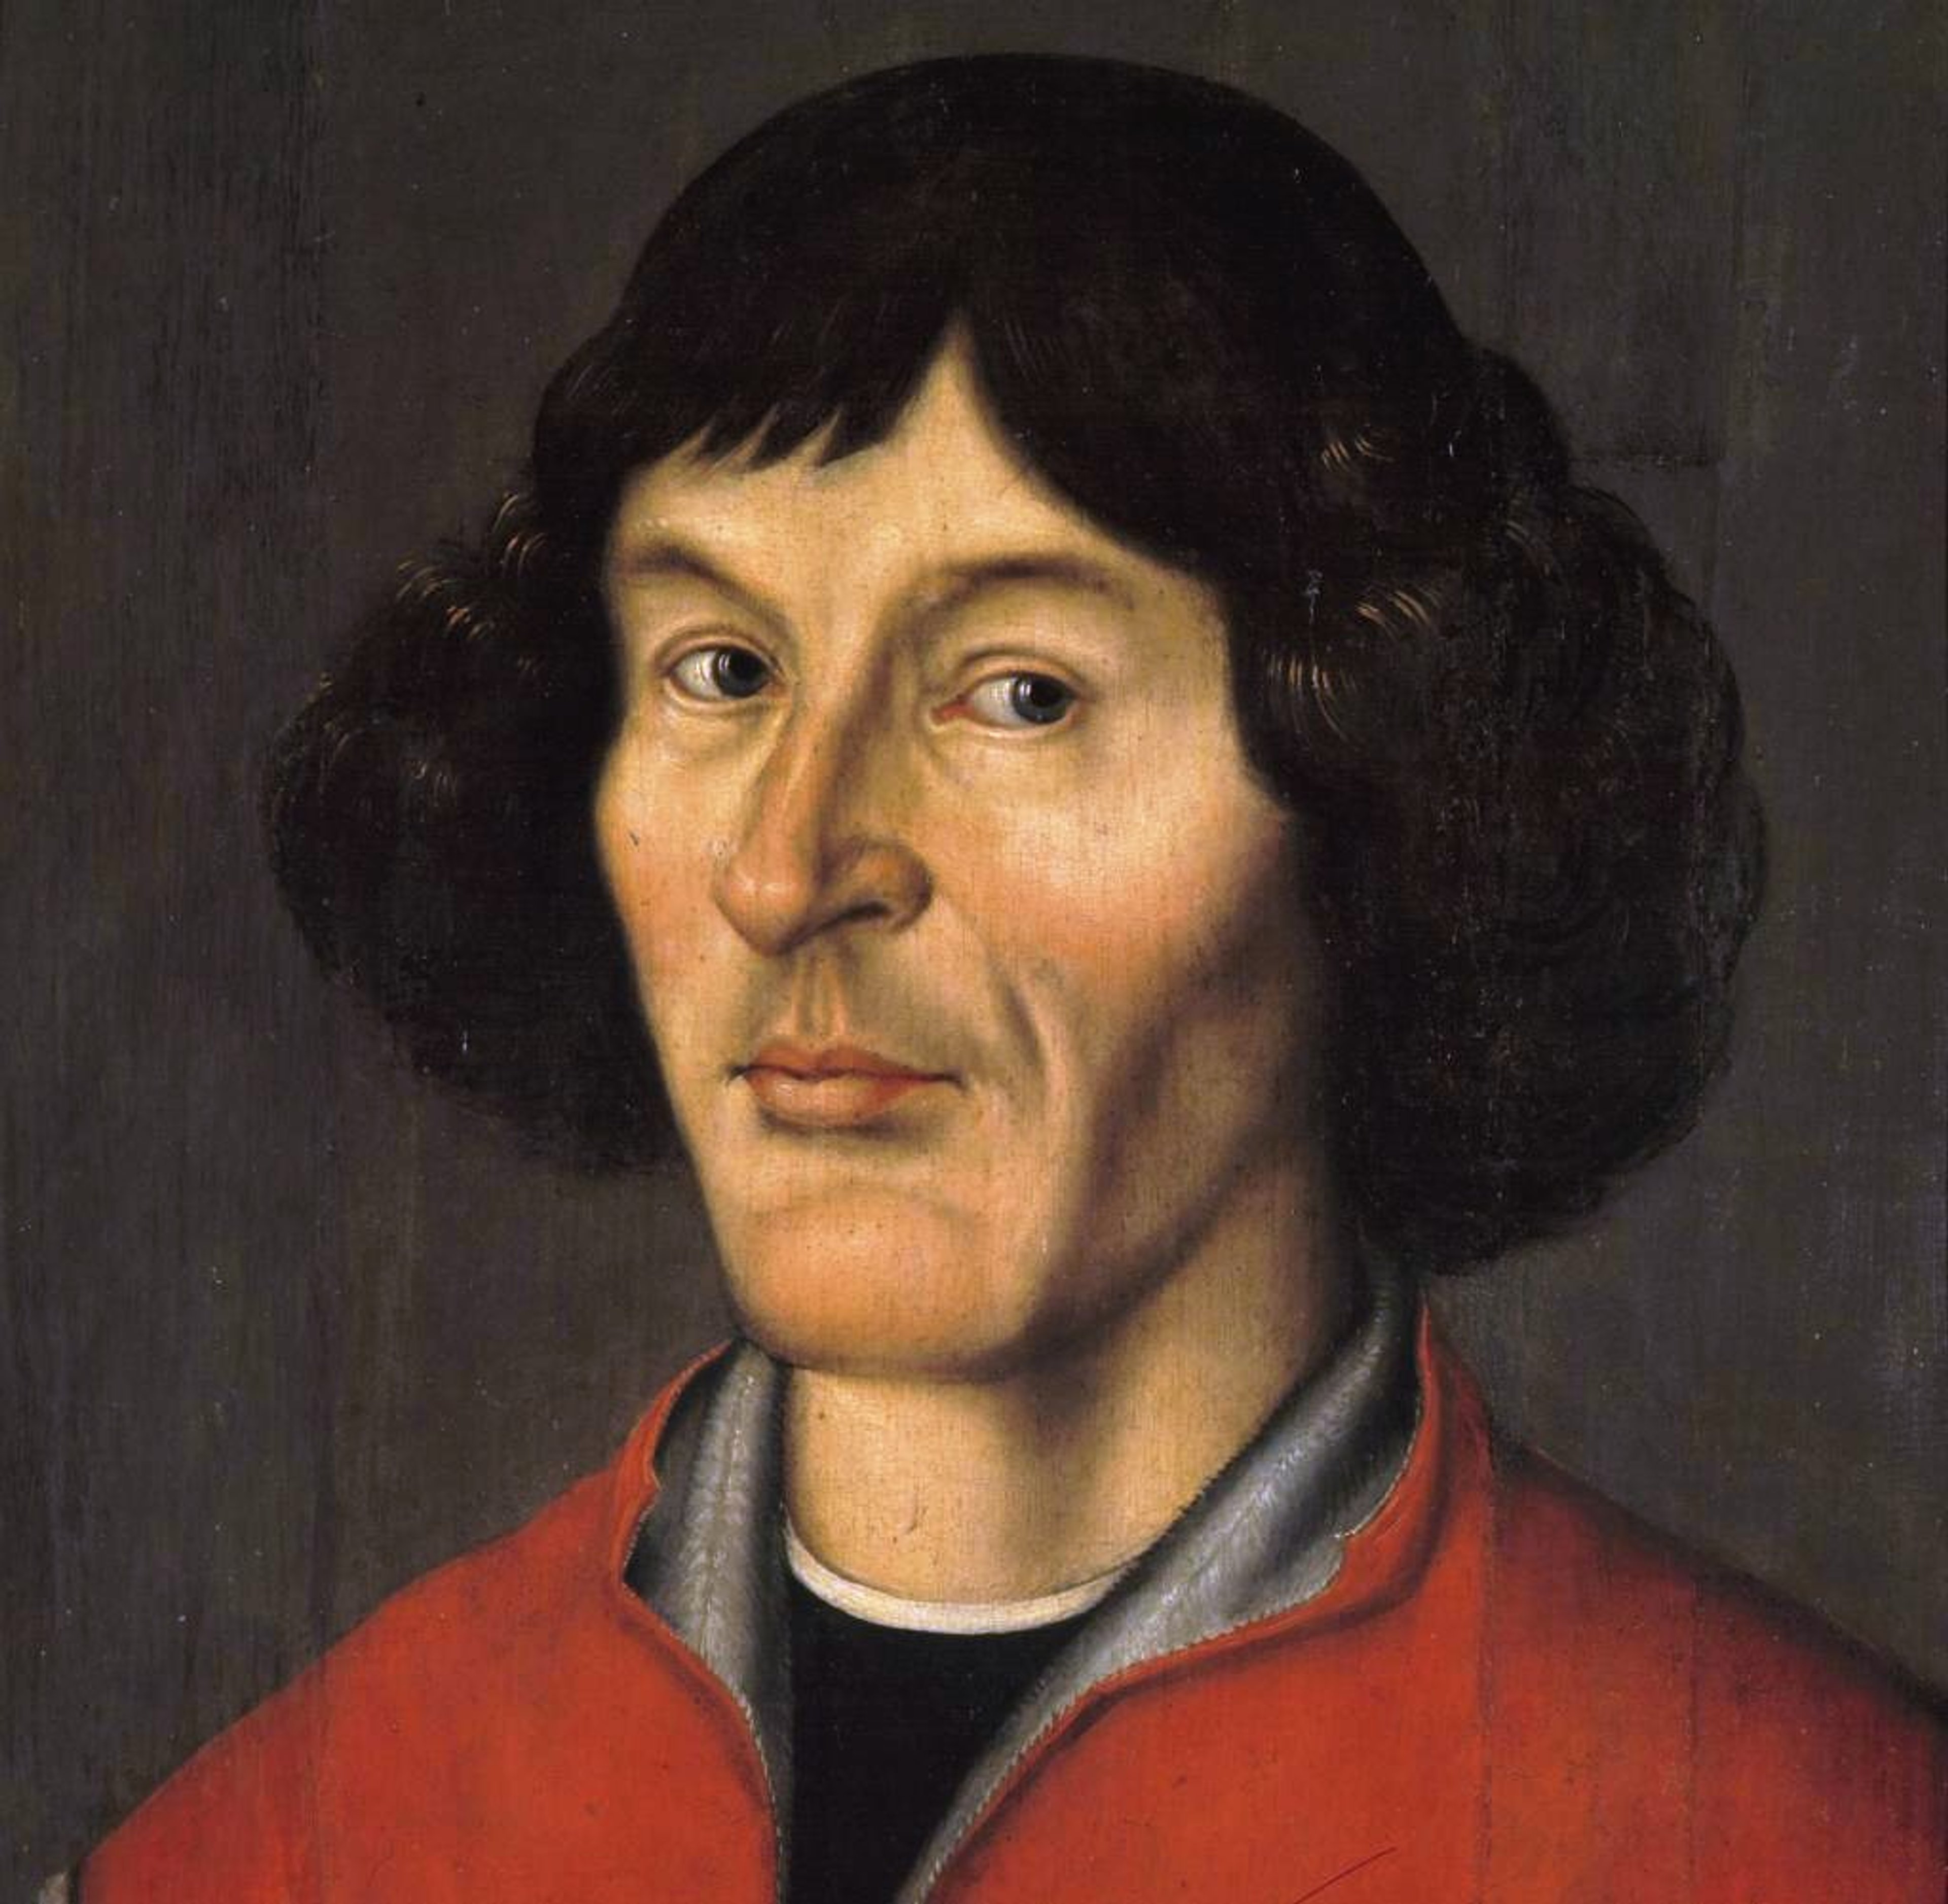 Close up portrait of the head and shoulders of Nicholas Copernicus, a man with long black hair, who's wearing a red robe.